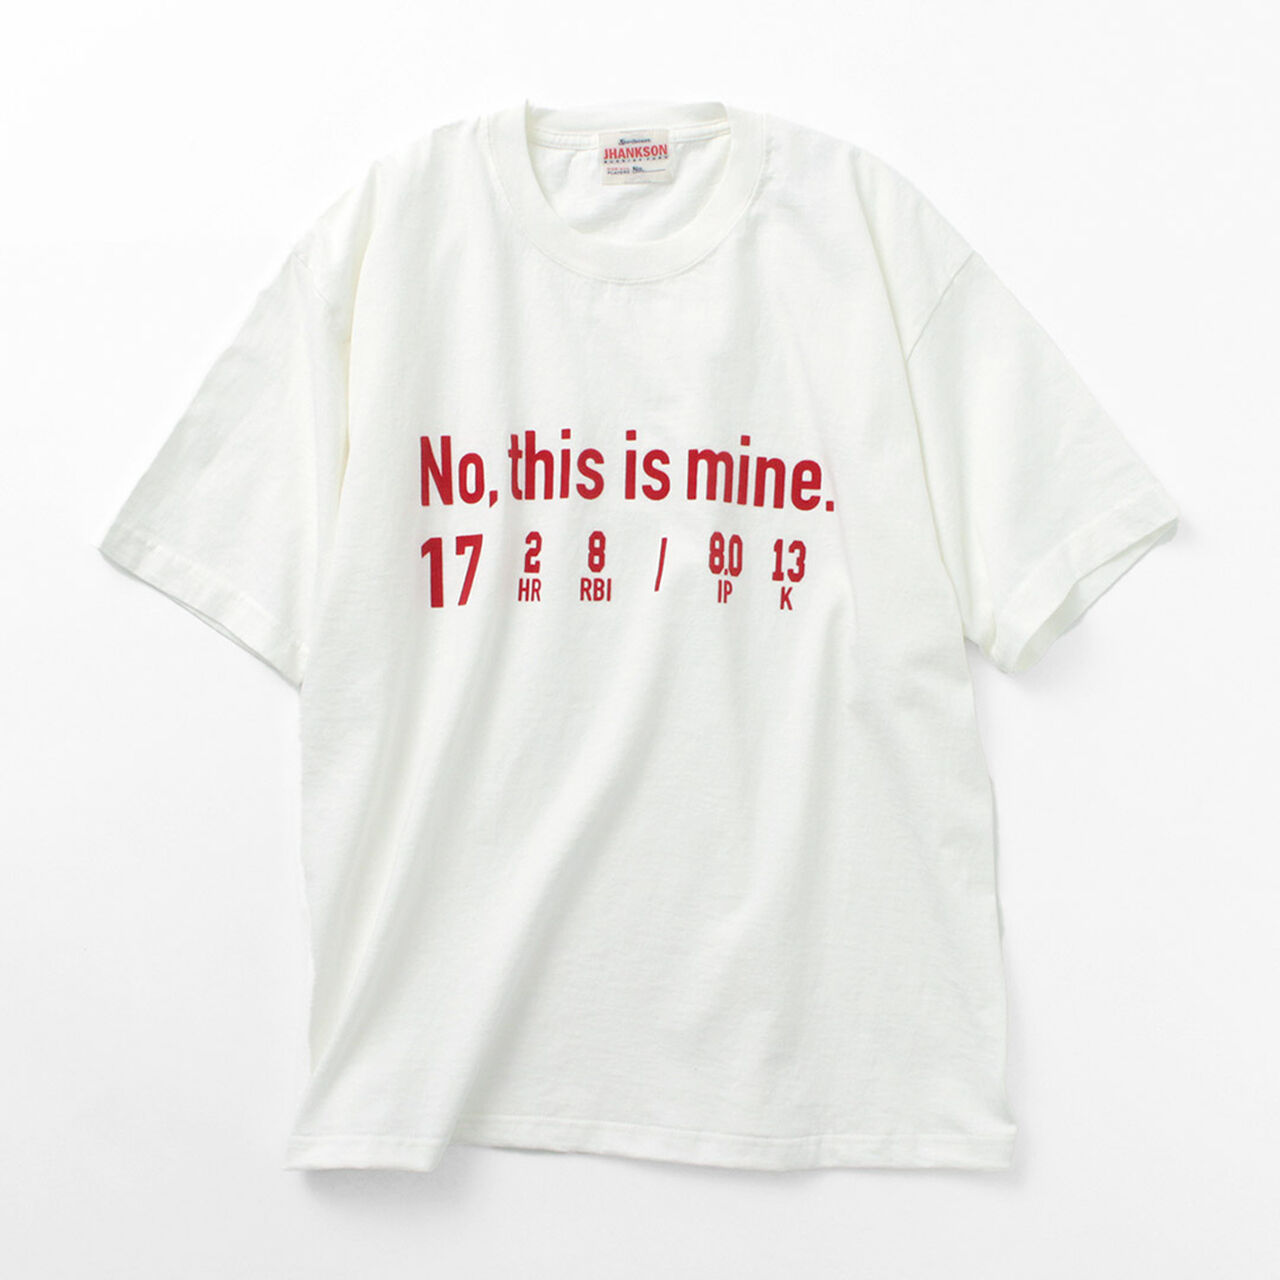 No, This is Mine short sleeve T-shirt,, large image number 0